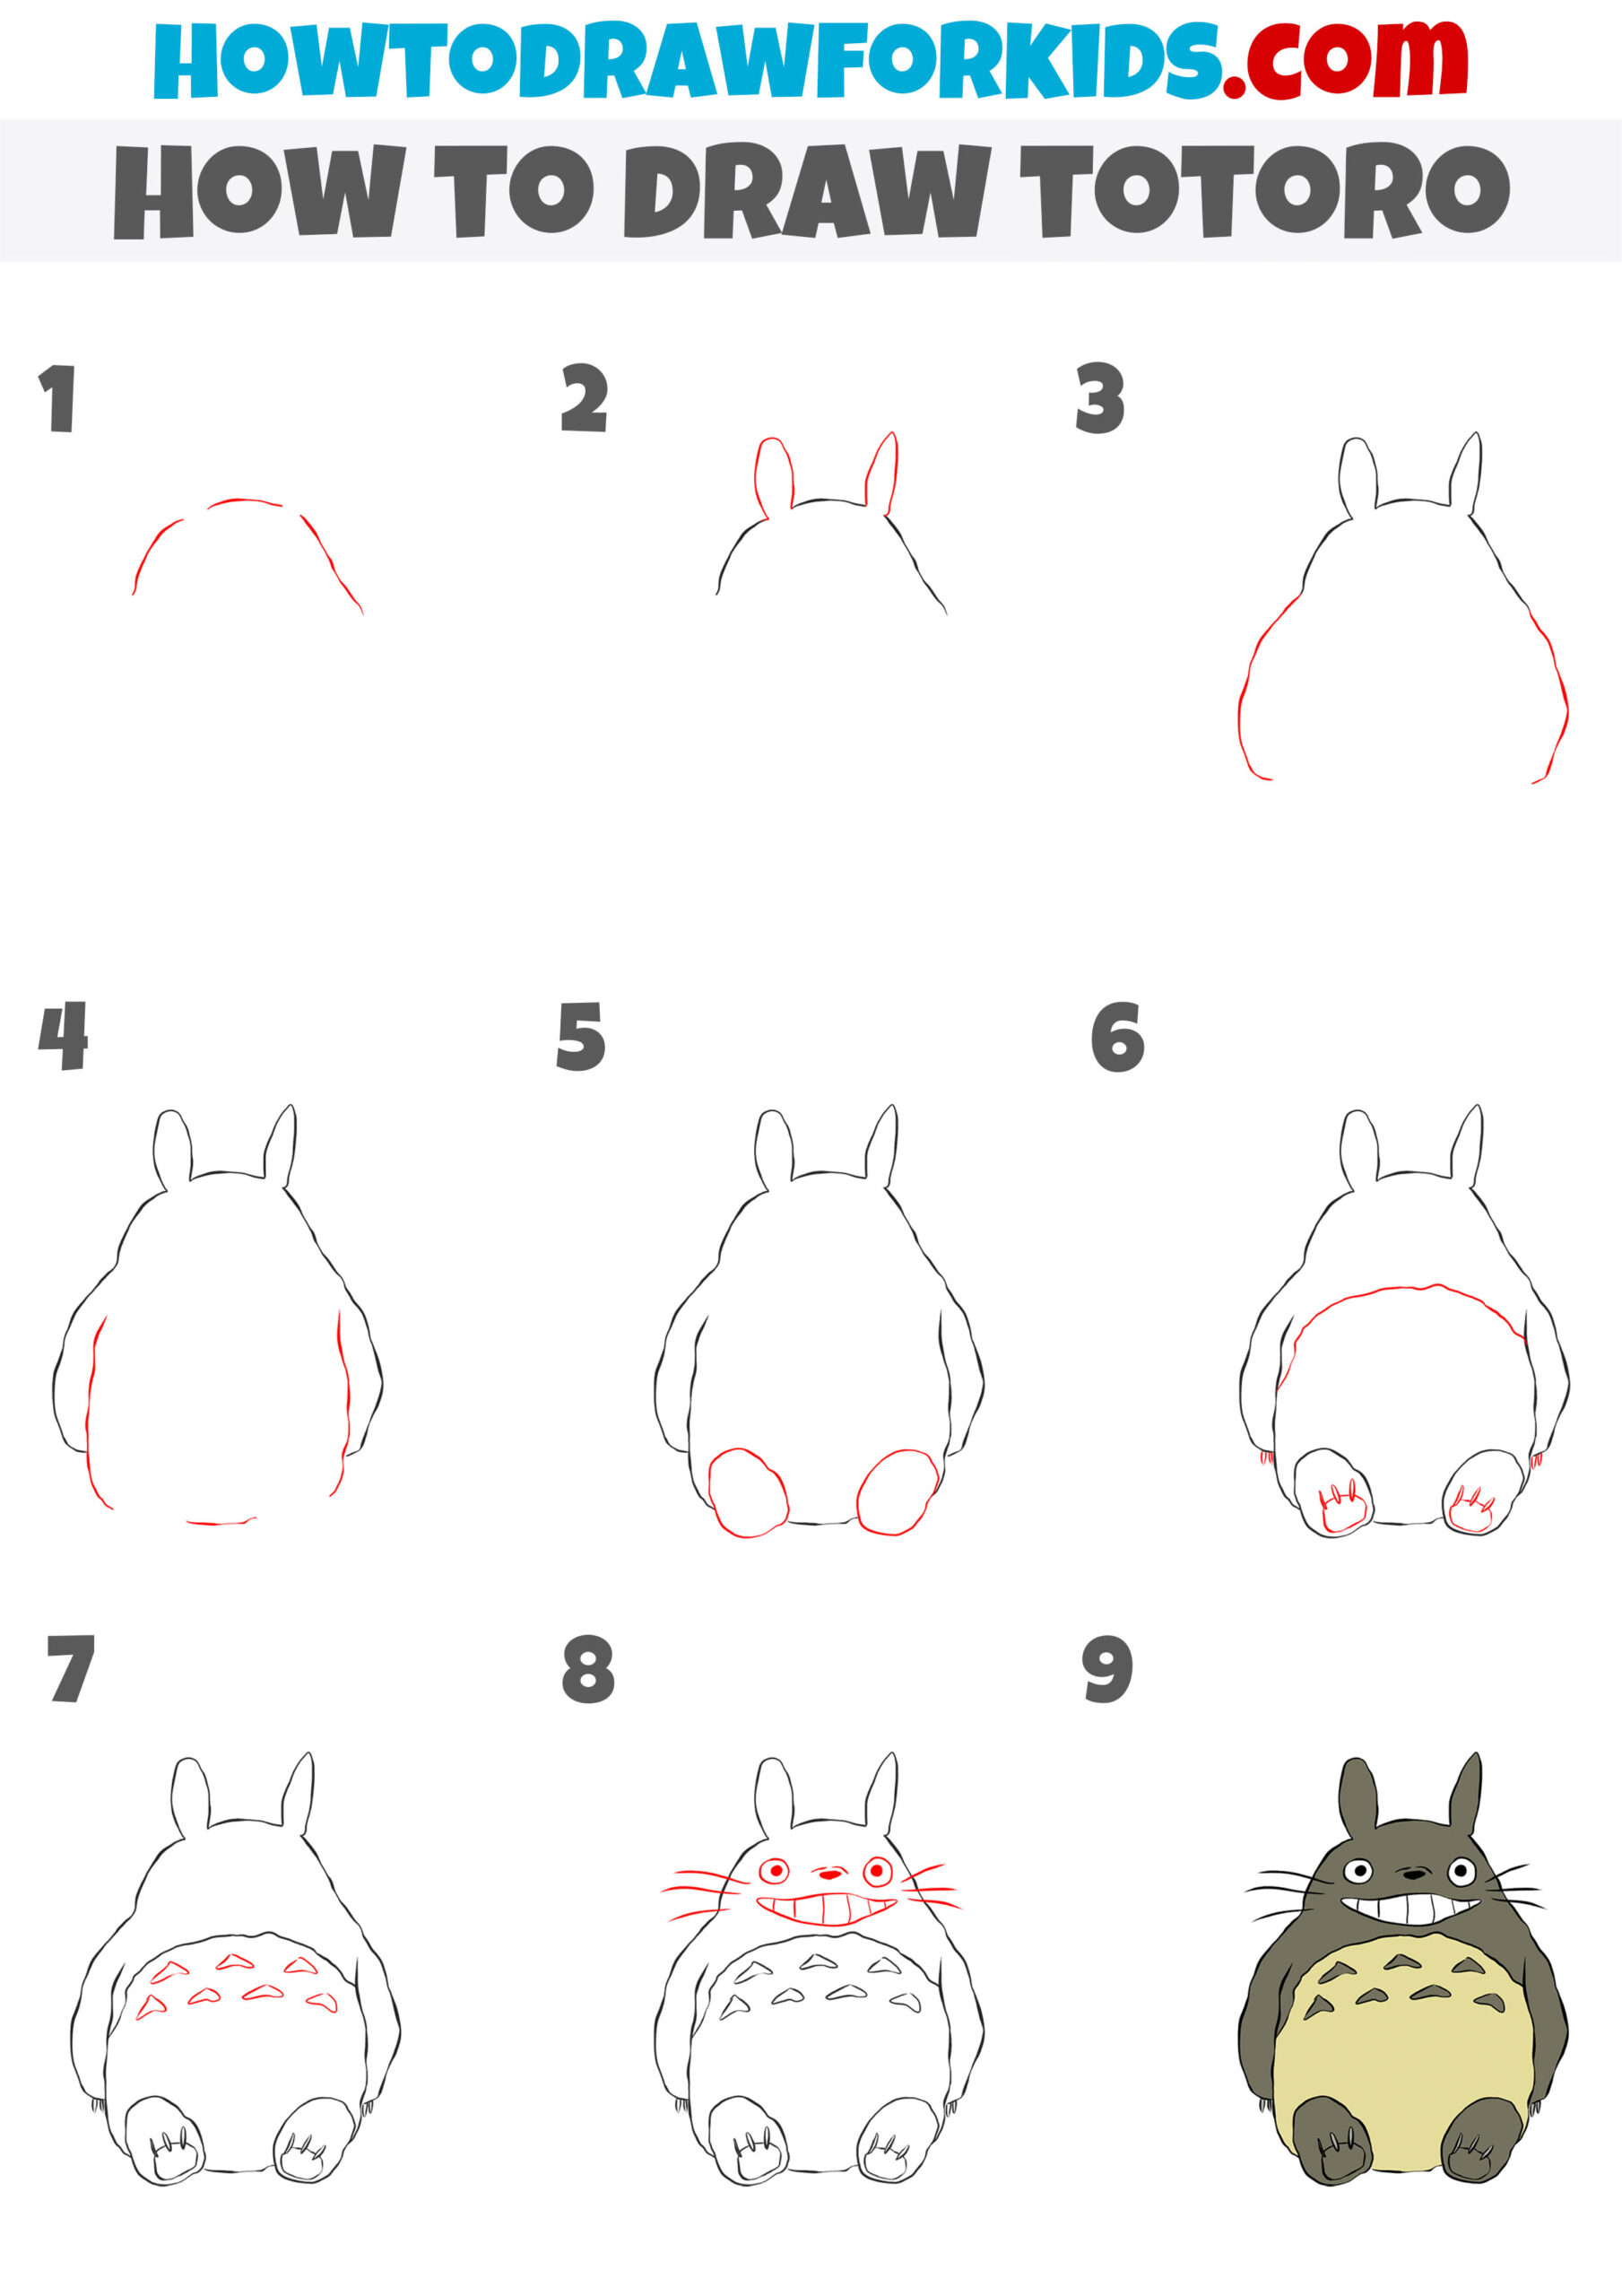 how to draw totoro step by step